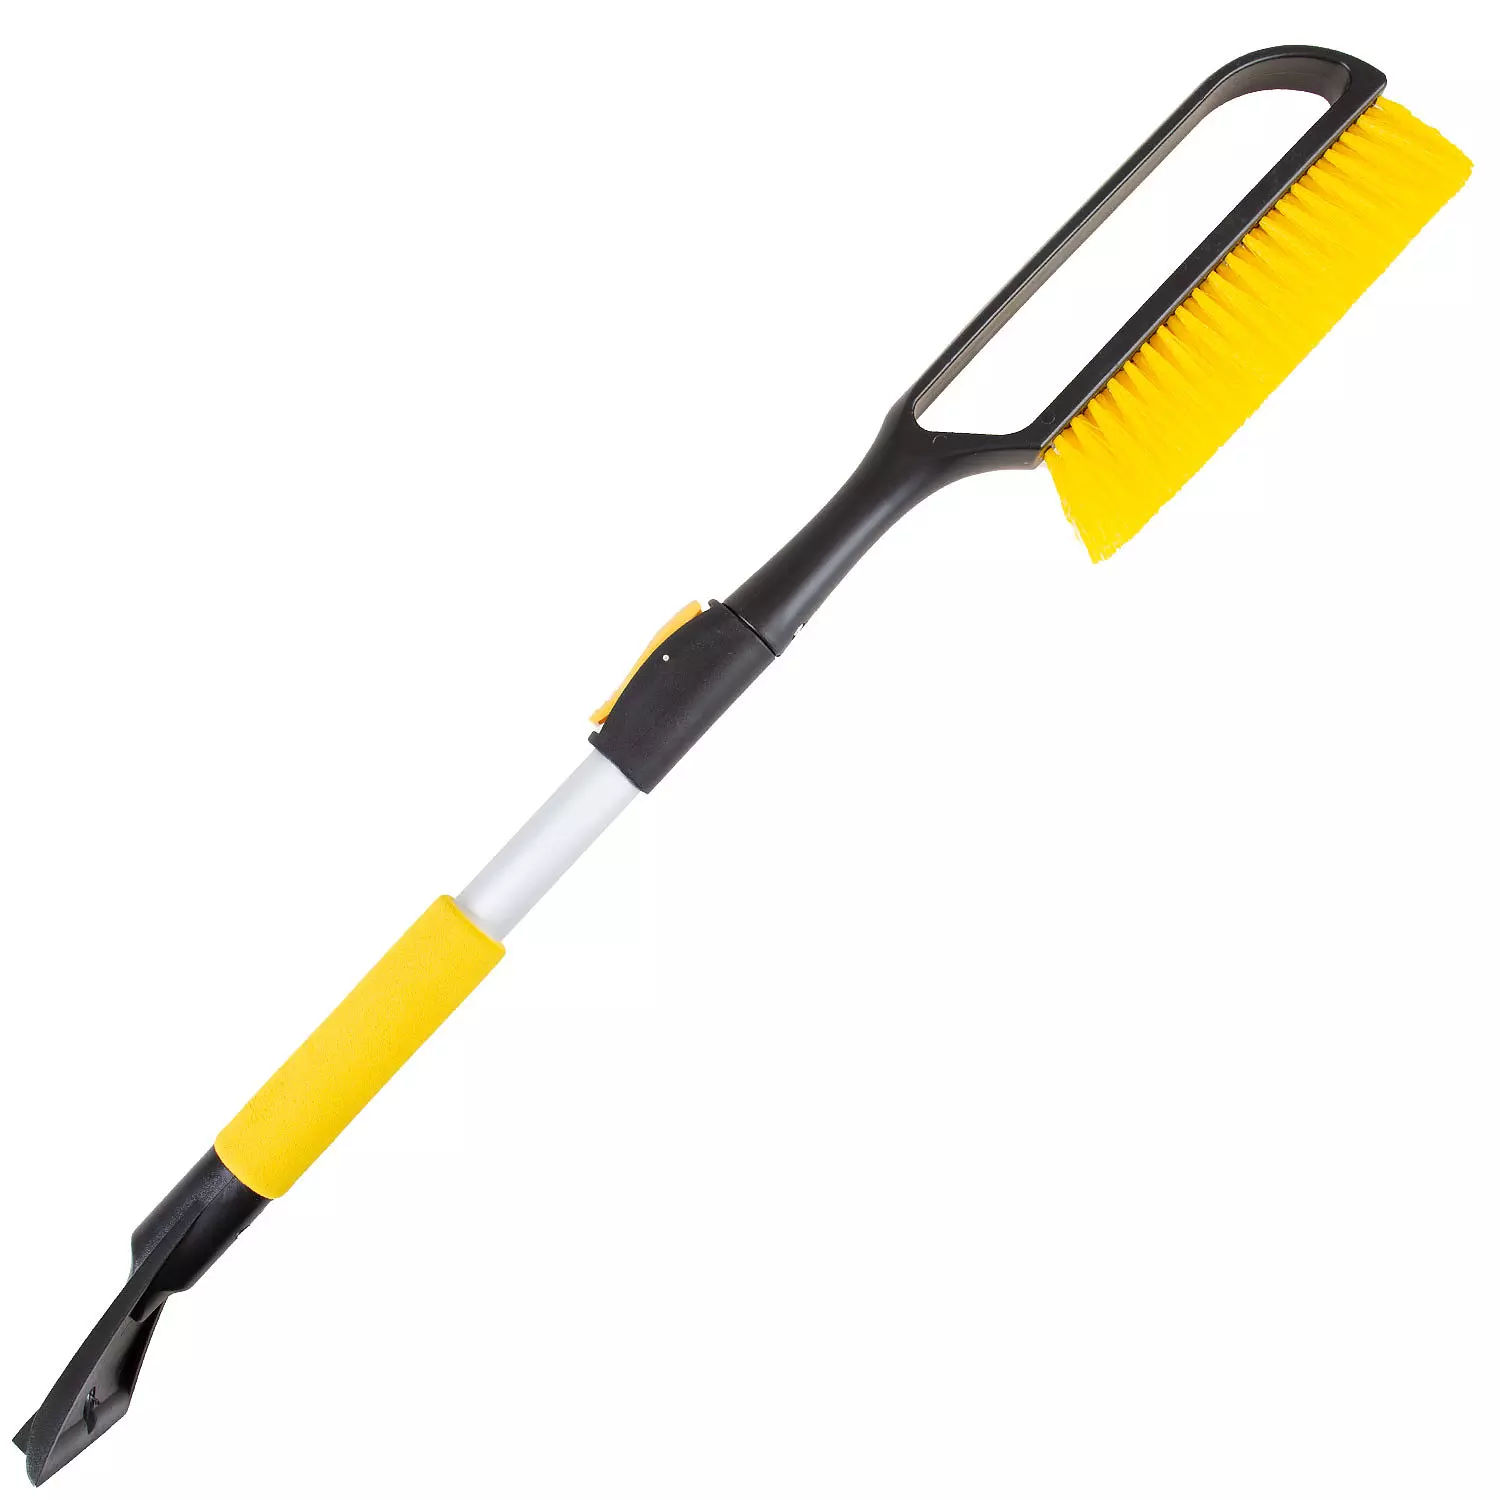 Deluxe expandable snow brush with ice scaper, 30" to 39"